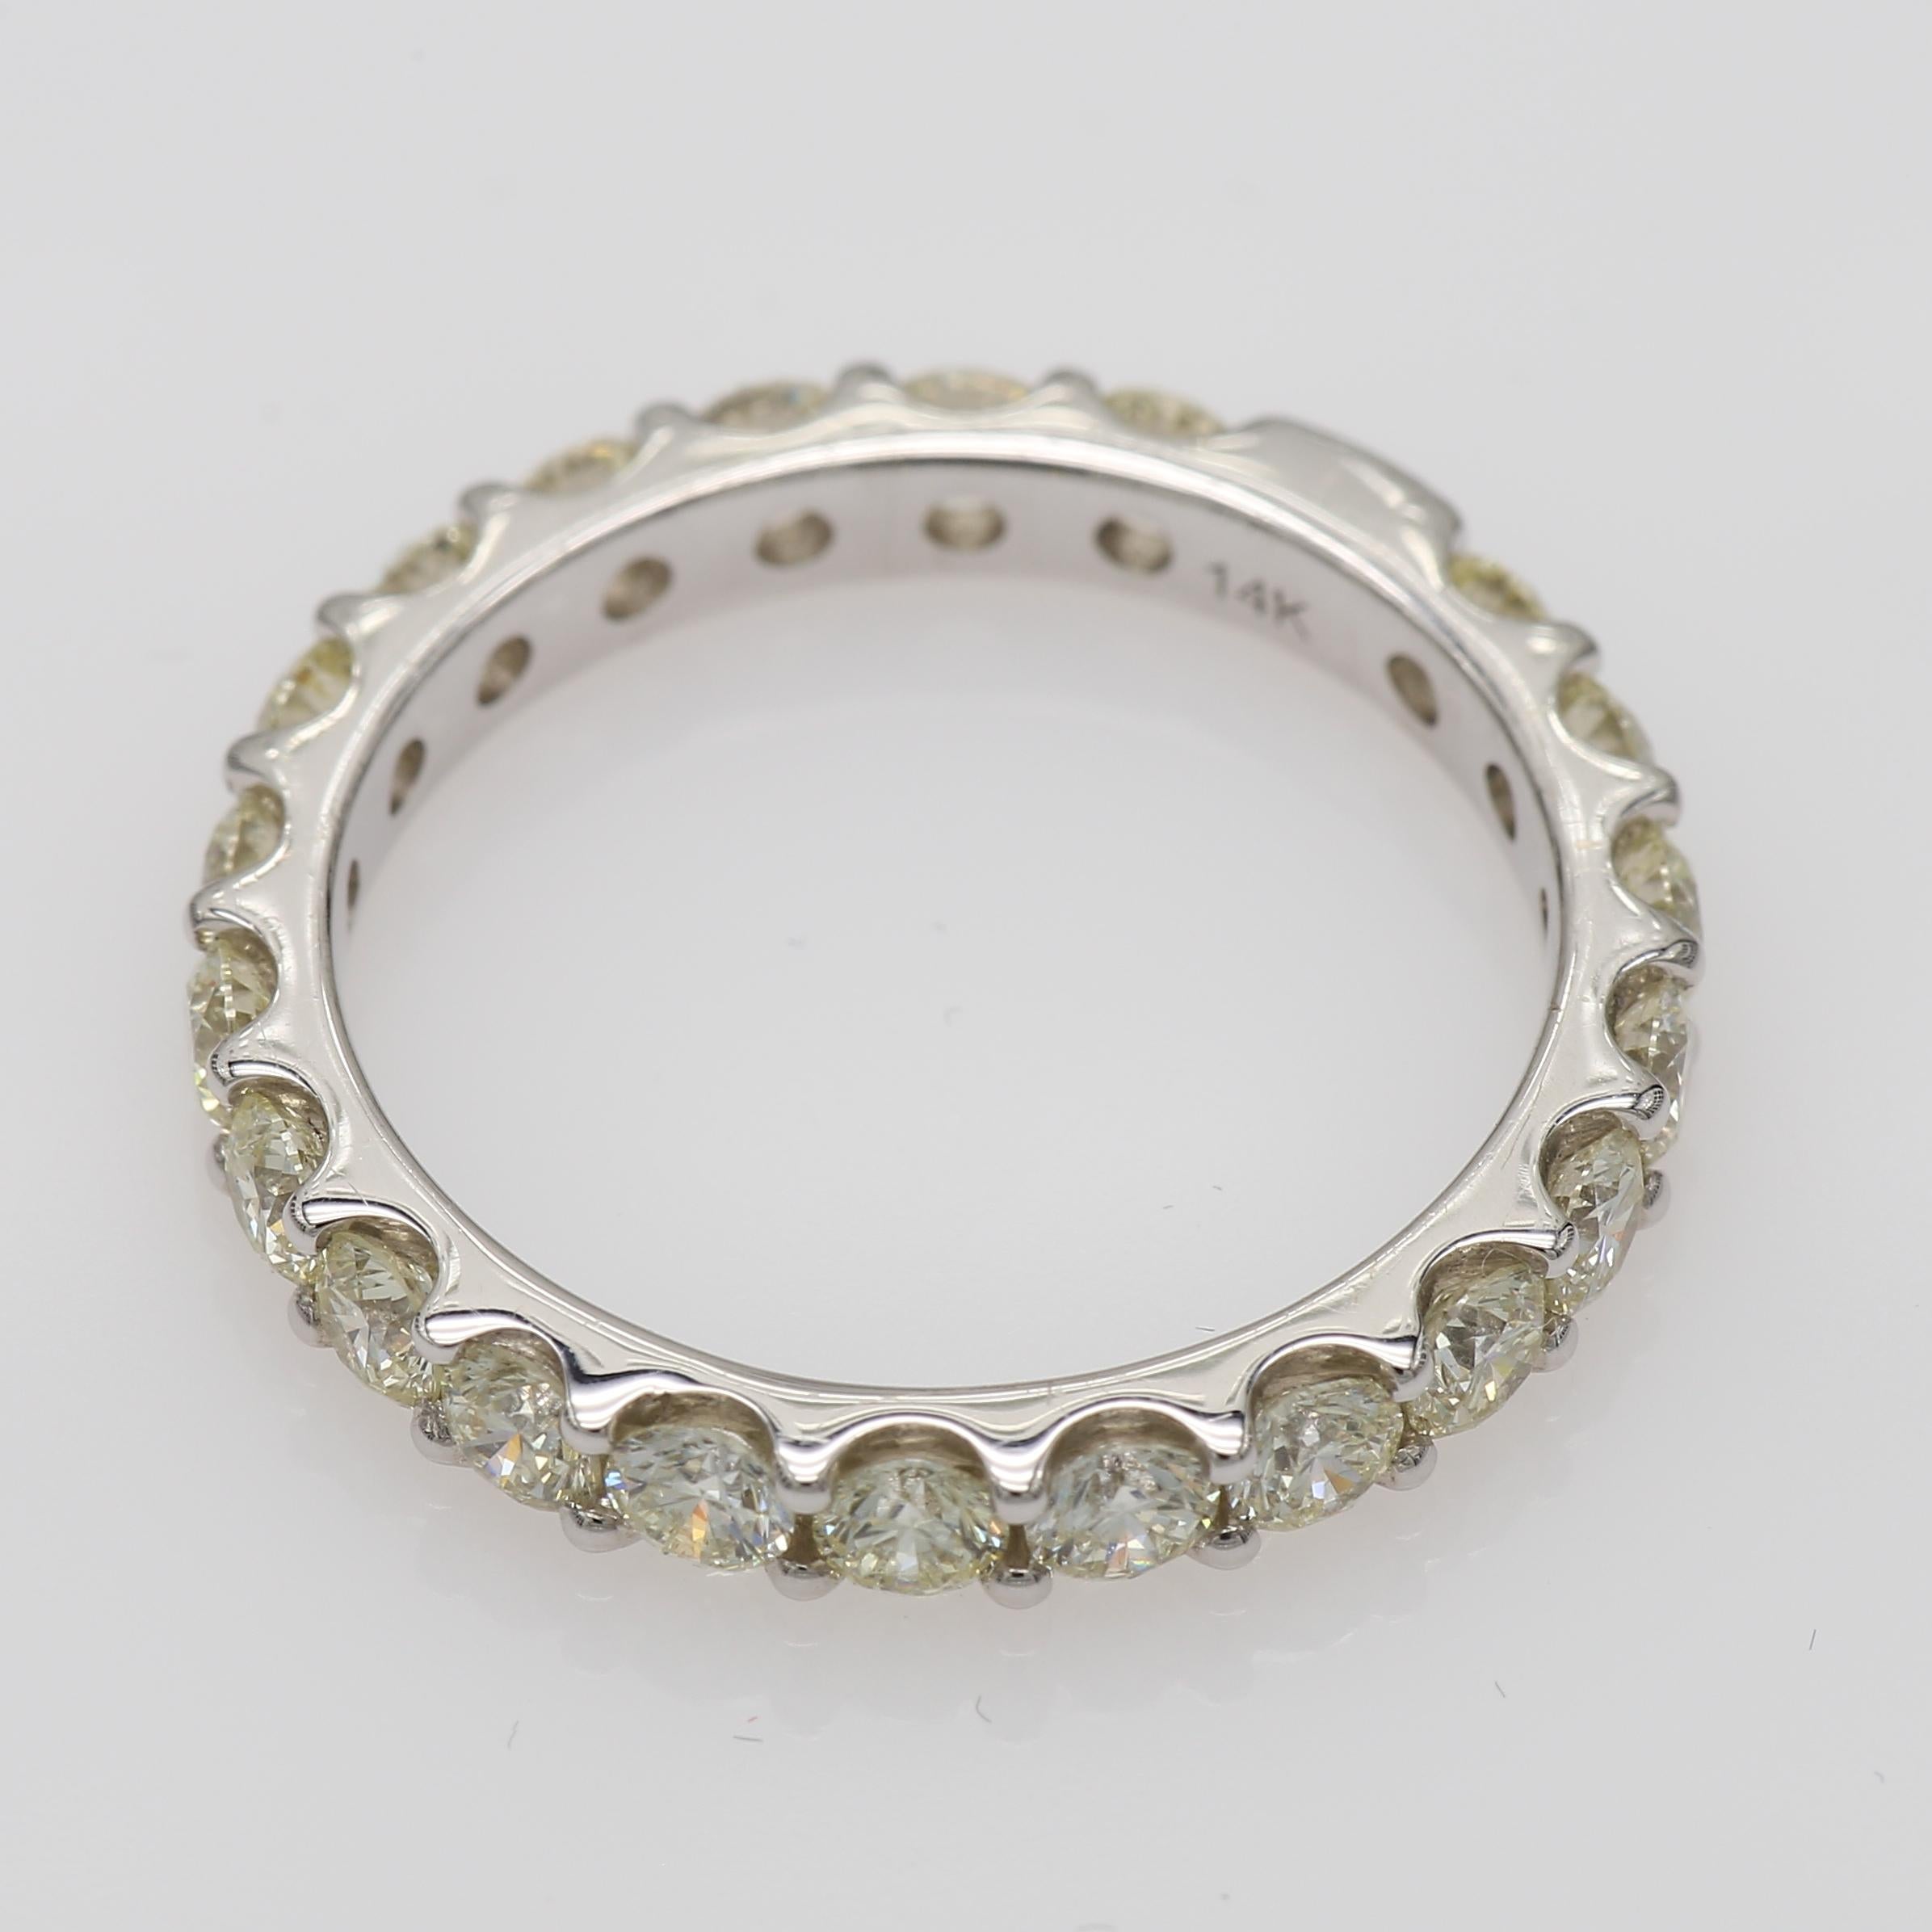 Delicate Eternity Band set with 21 Round Diamonds (Total Carat Weight 1.72 ) in 14 K White Gold. Upgrade your jewelry collection with this classic ring or gift it to your loved. Anyway this classci diamond eternity ring will bring you sparkles and